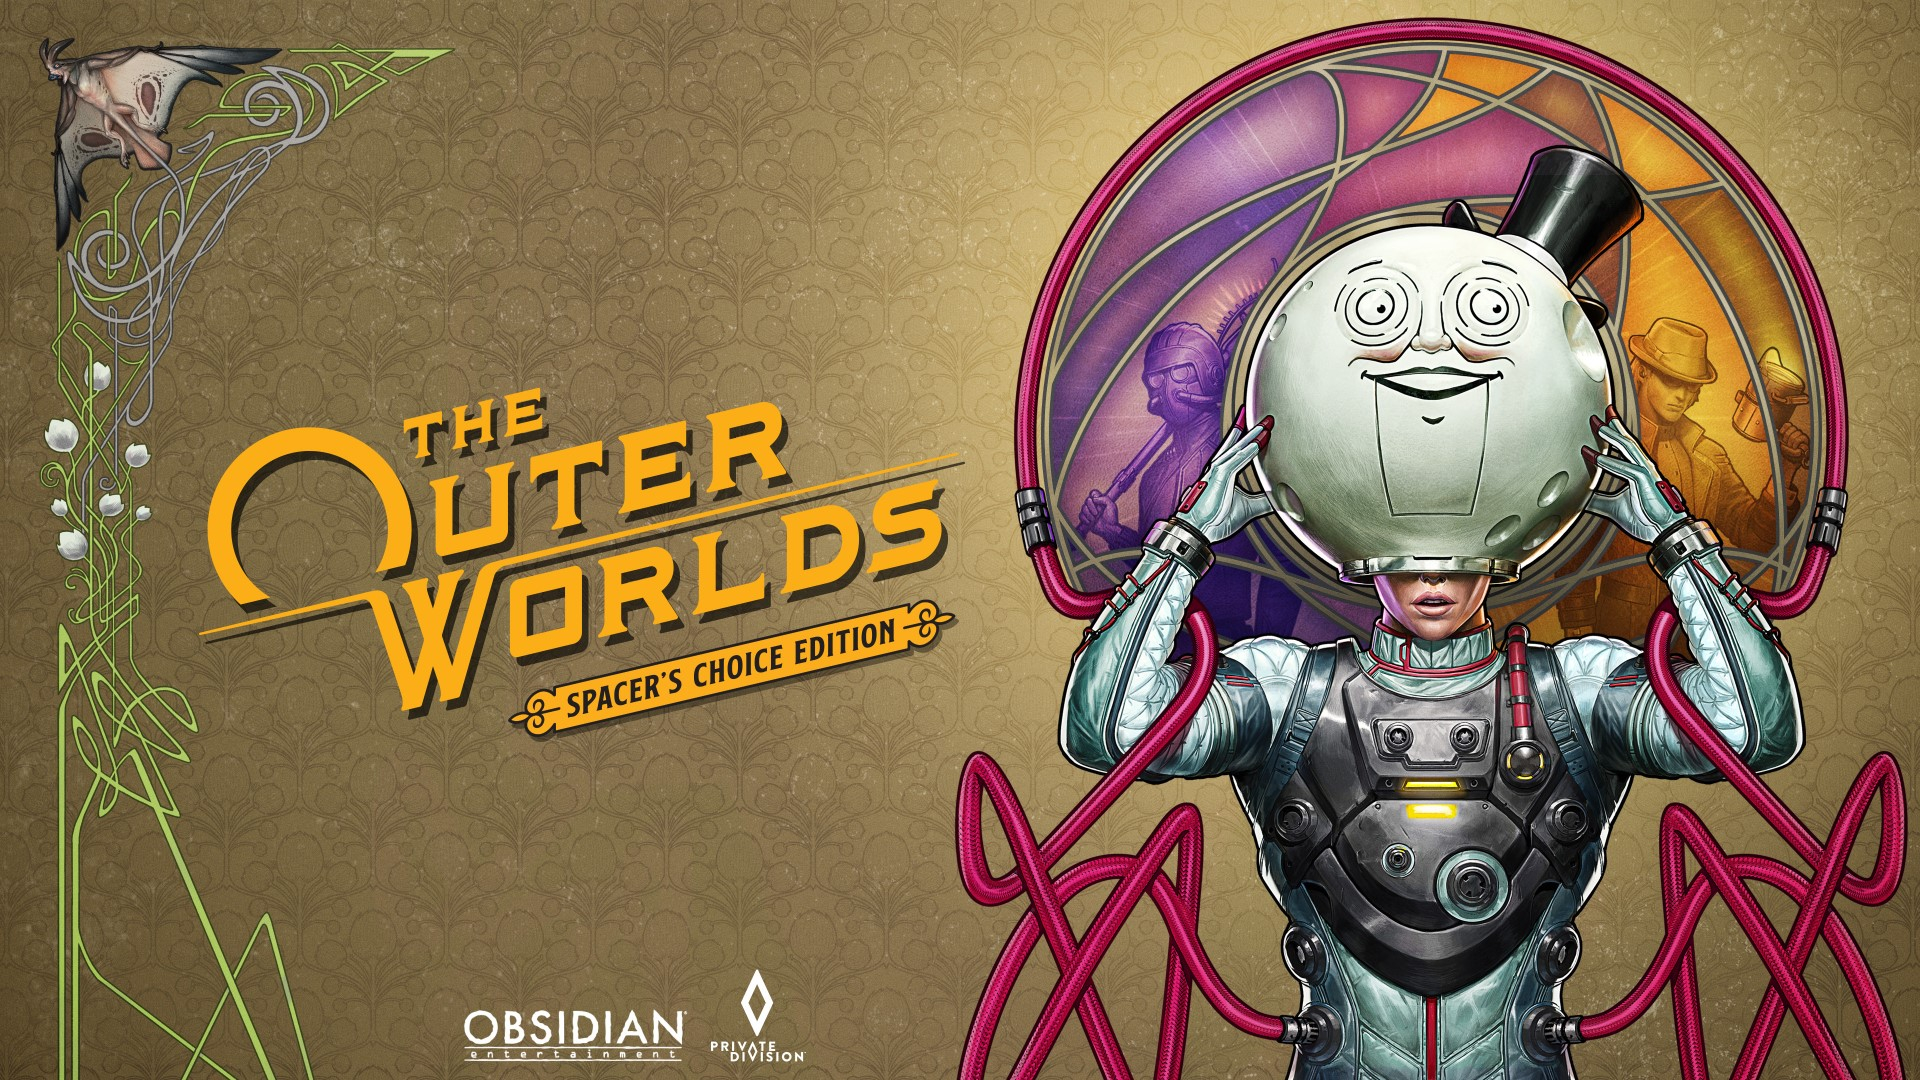 The Outer Worlds 2 release date speculation, trailer, latest news